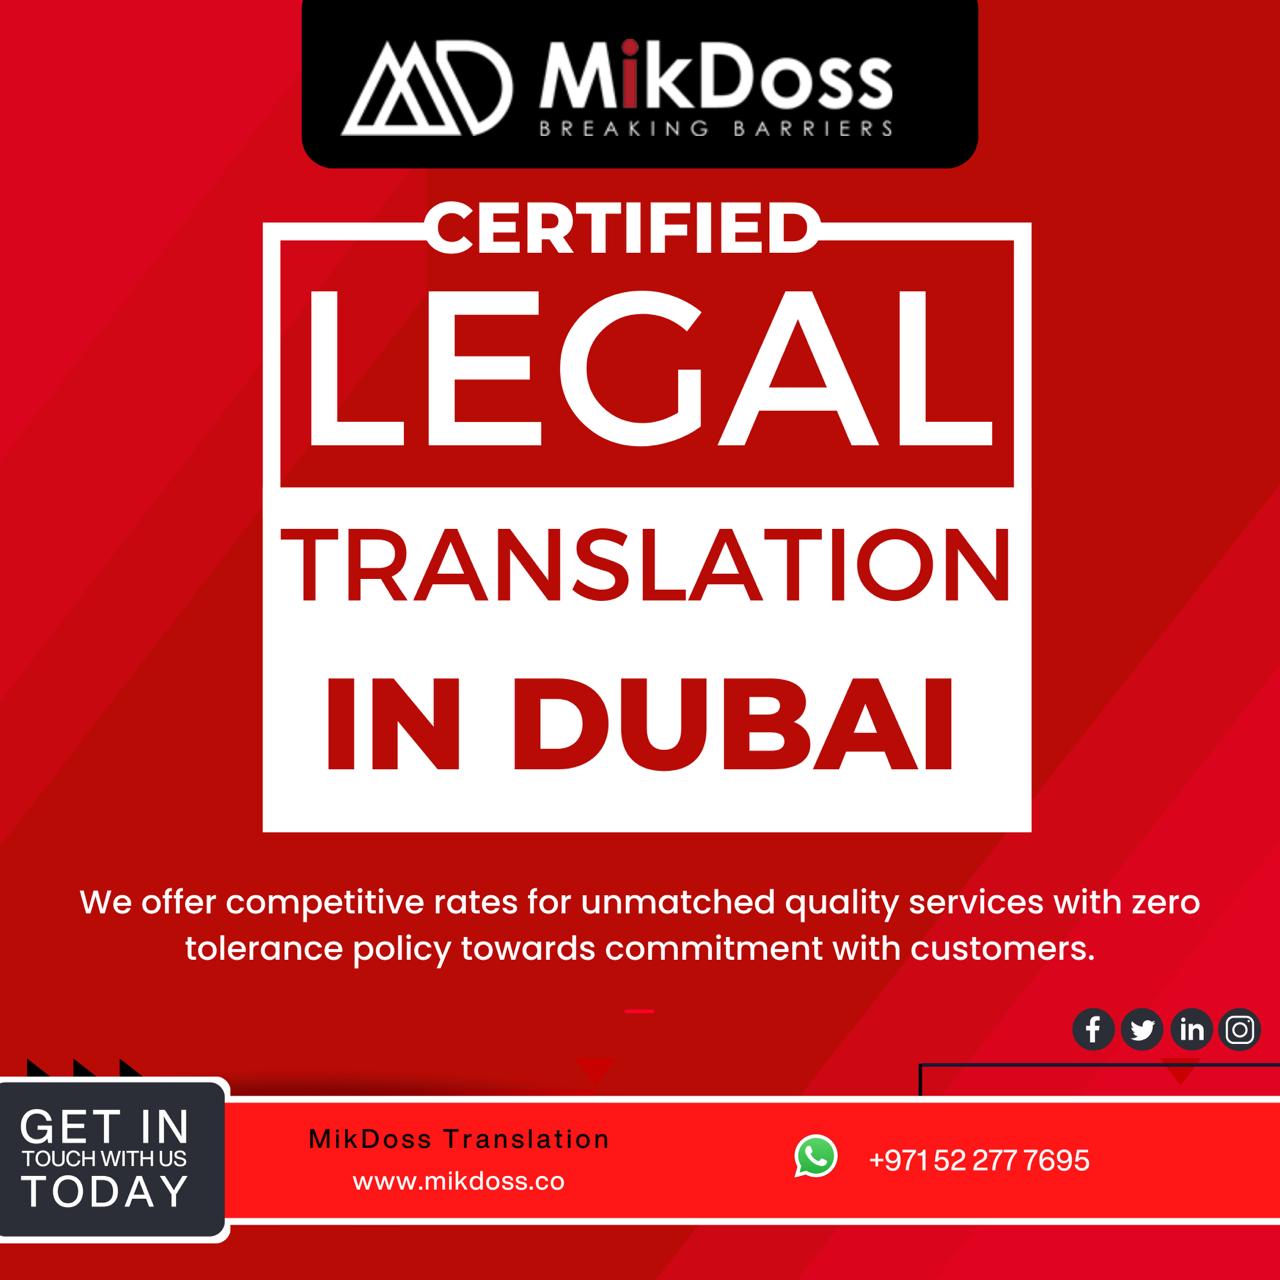 We are here to assist you by providing the best translation services in Dubai for your personal, business, and legal documents.